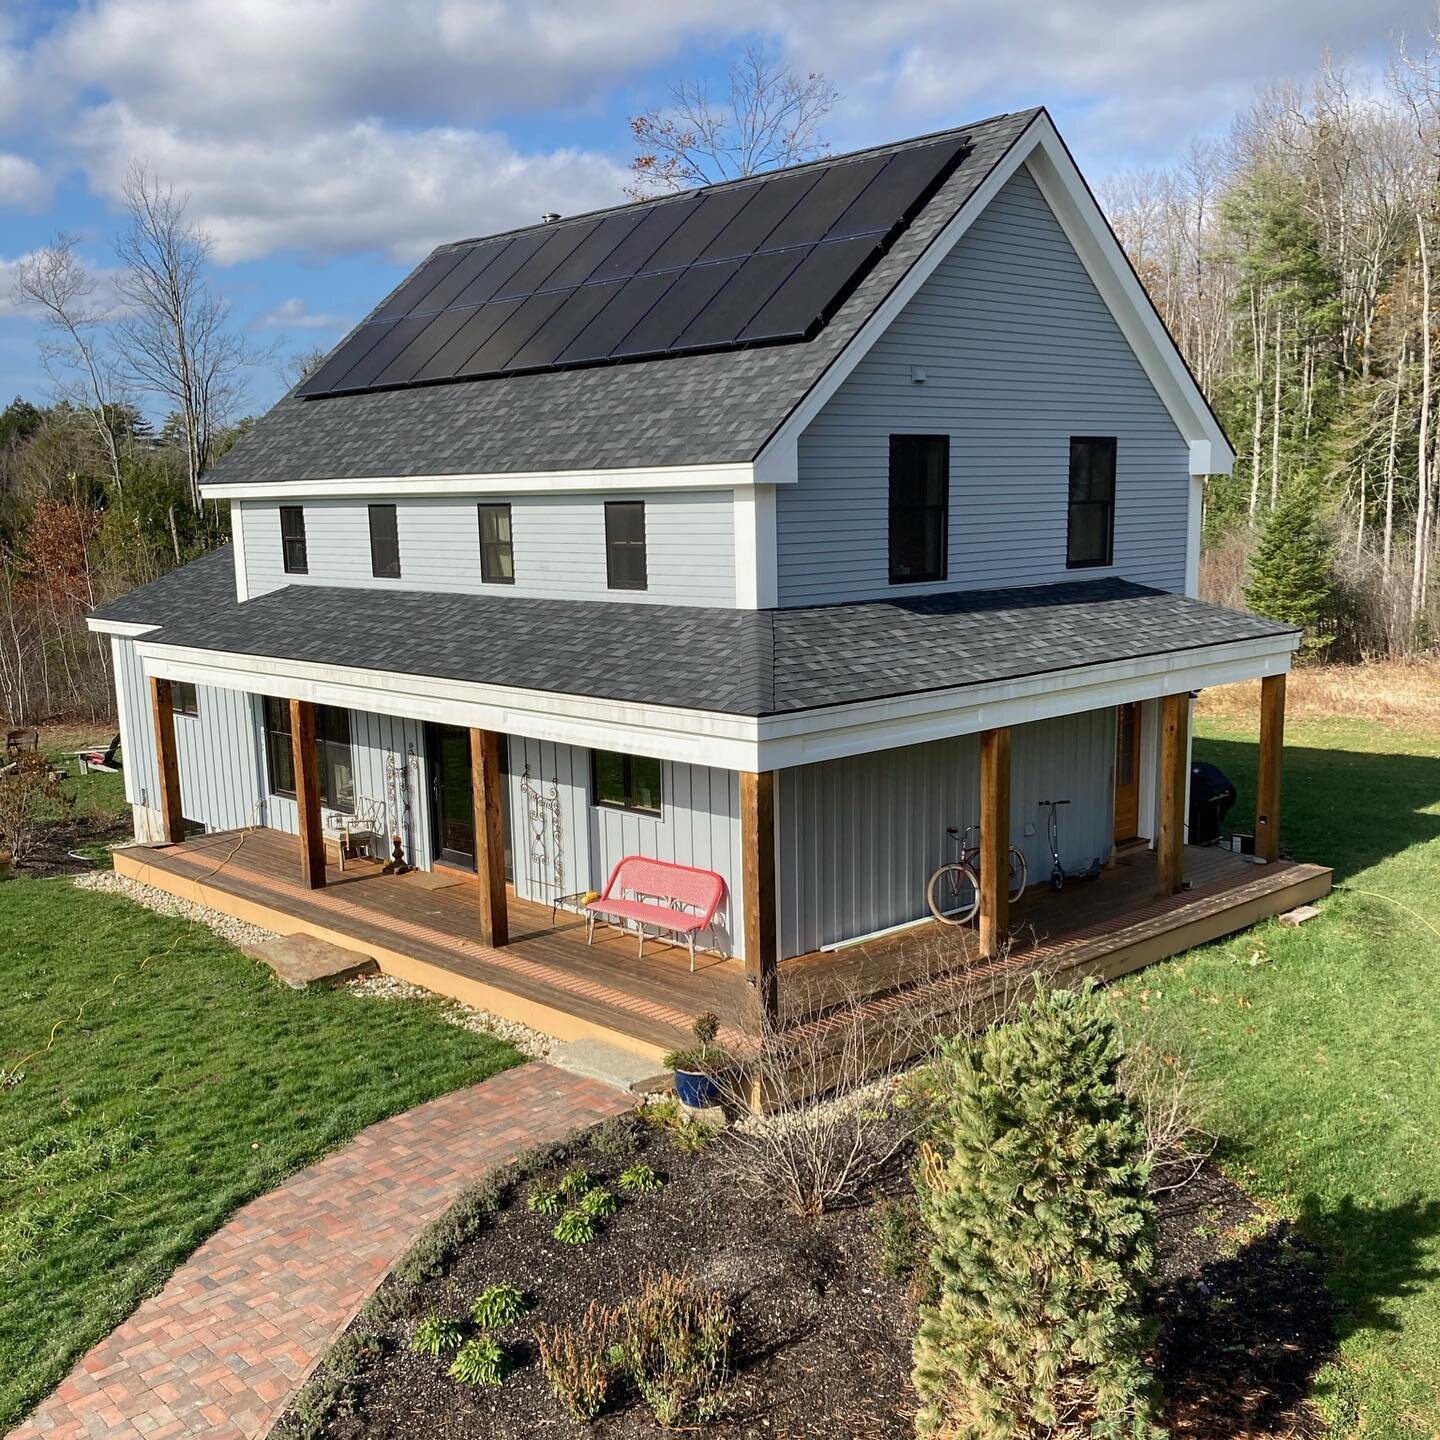 Slate farmhouse from the second floor of the party barn! Each house in this solar neighborhood is unique and different, yet built off the same original block and turned or manipulated to faith that site and owners needs. #solarway #livemaine #maine #